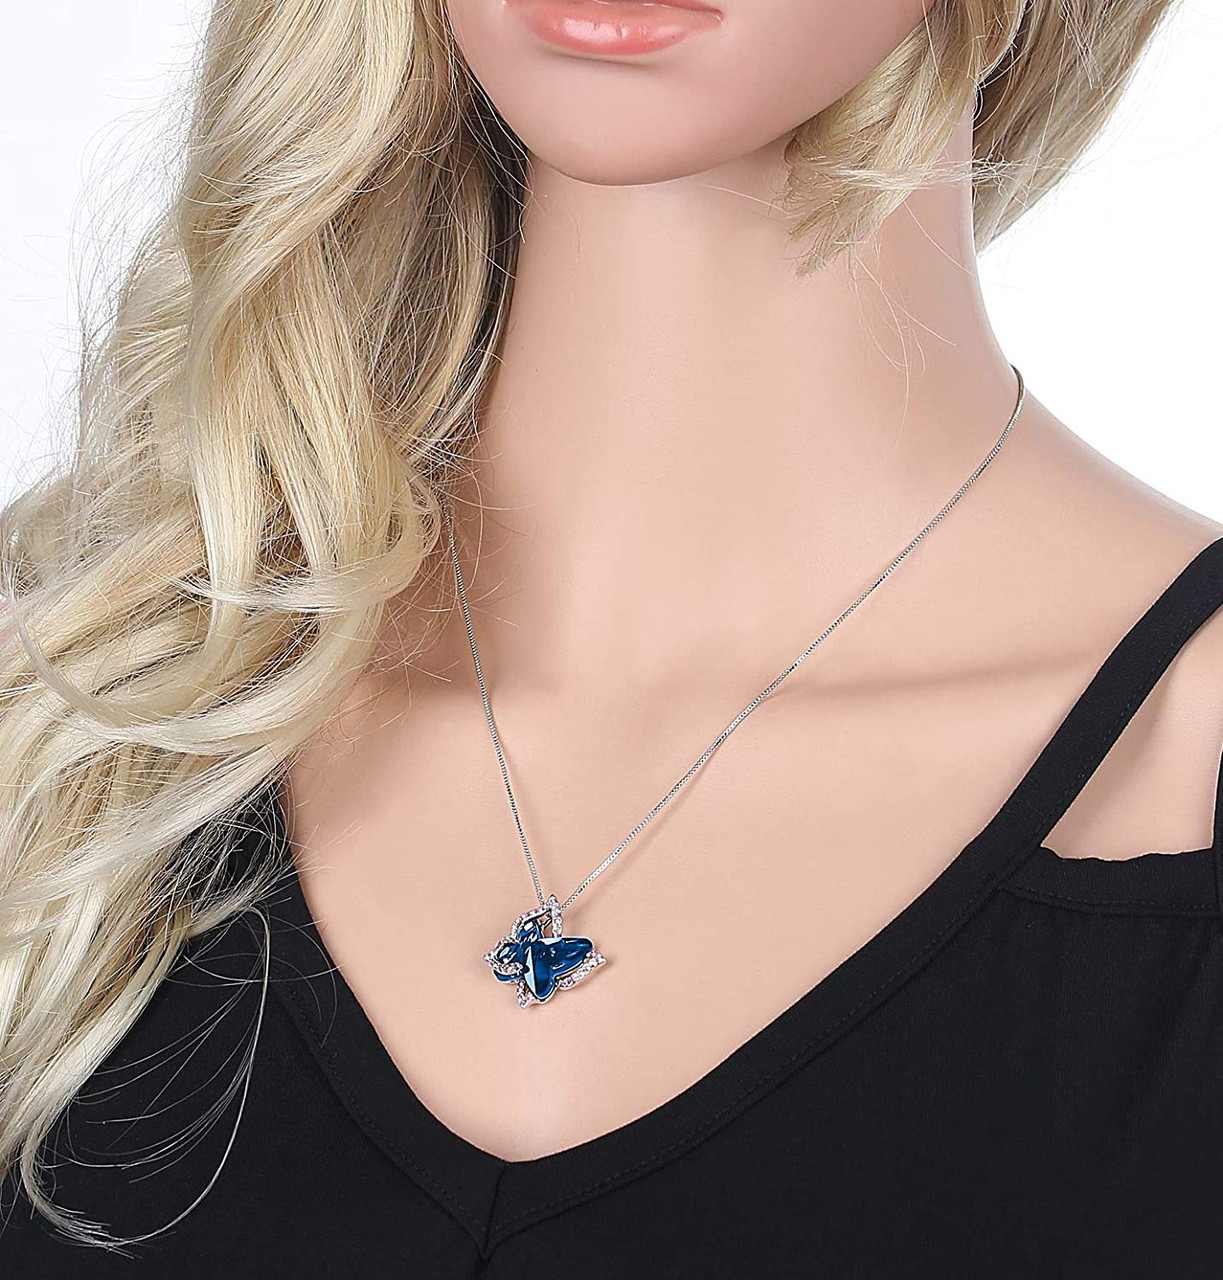 September Birthstone - Dark Blue Sapphire Double Butterflies Design Crystal Pendant and CZ stones - with 18" Chain Necklace. Gift for Lover, Girl Friend, Wife, Valentine's Day Gift, Mother's Day, Anniversary Gift Butterfly Necklace.